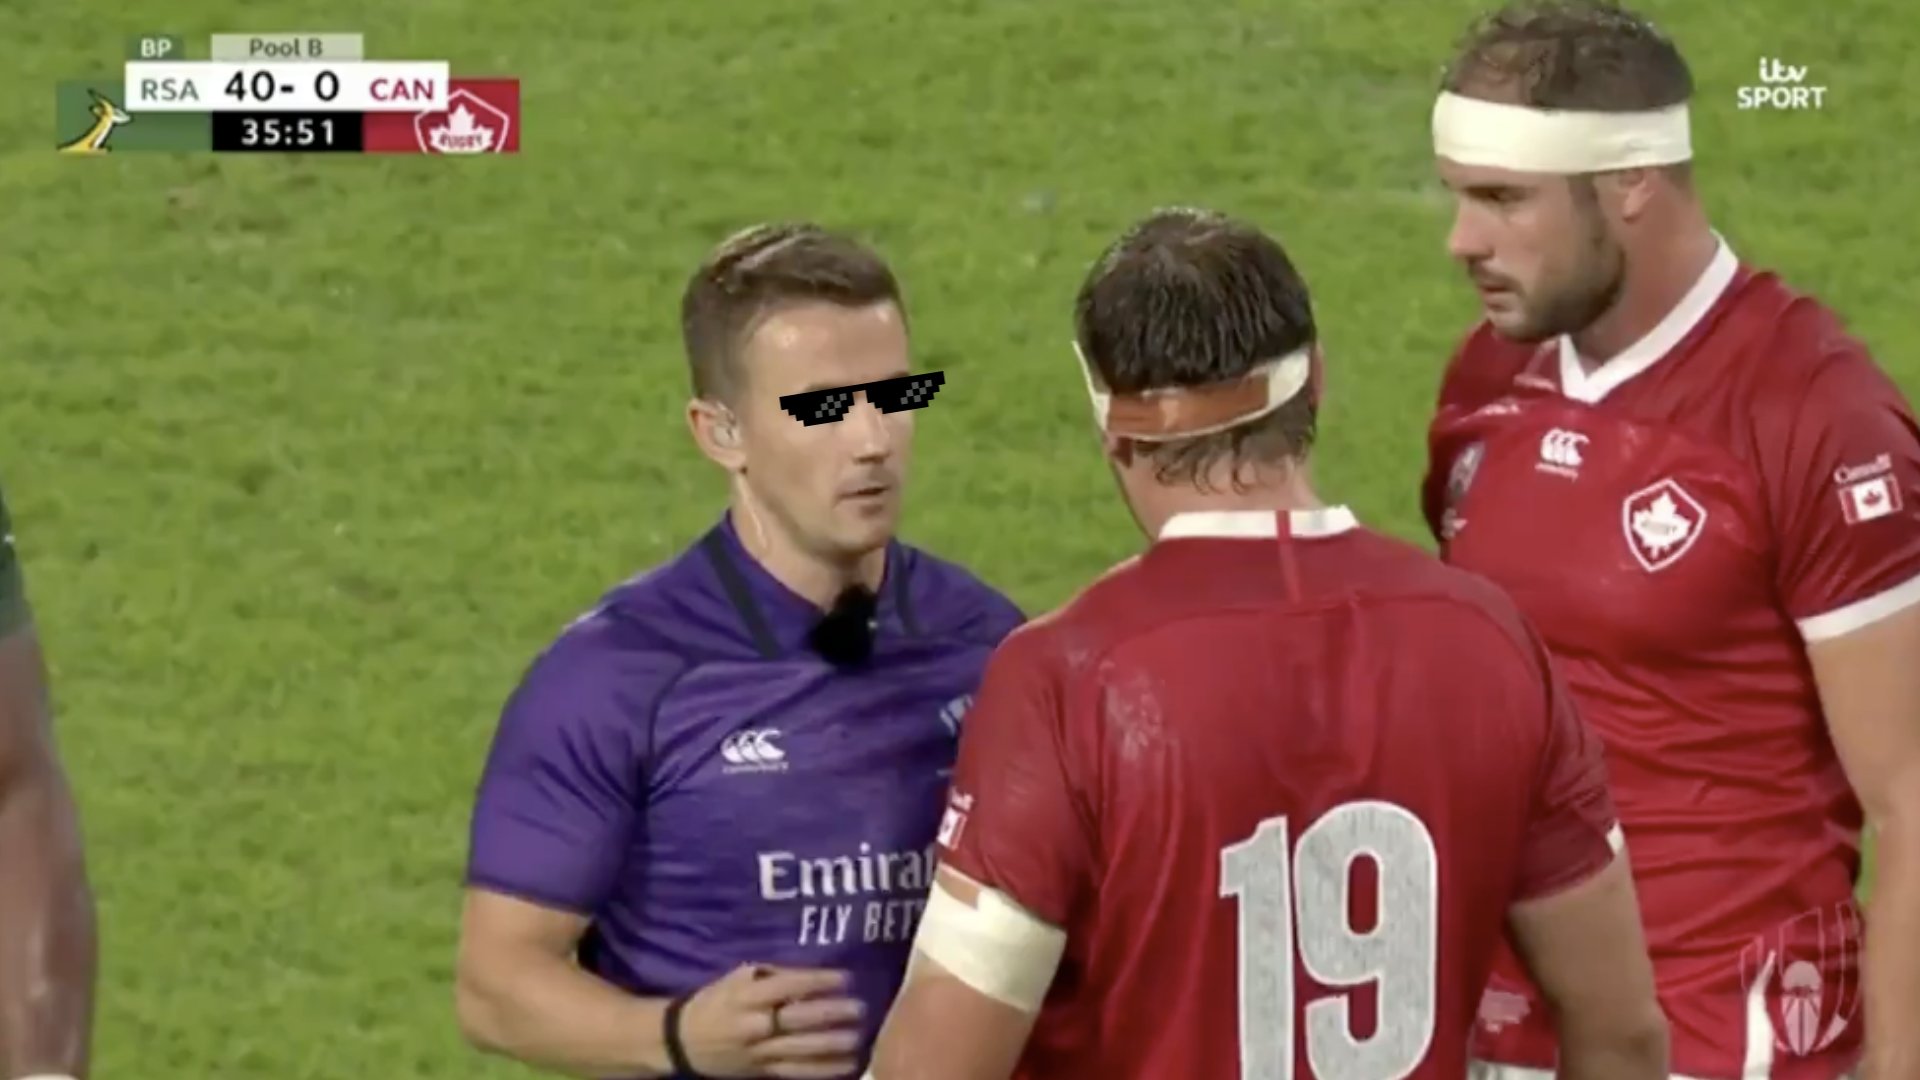 Luke Pearce universally praised for his immaculate refereeing of South Africa match